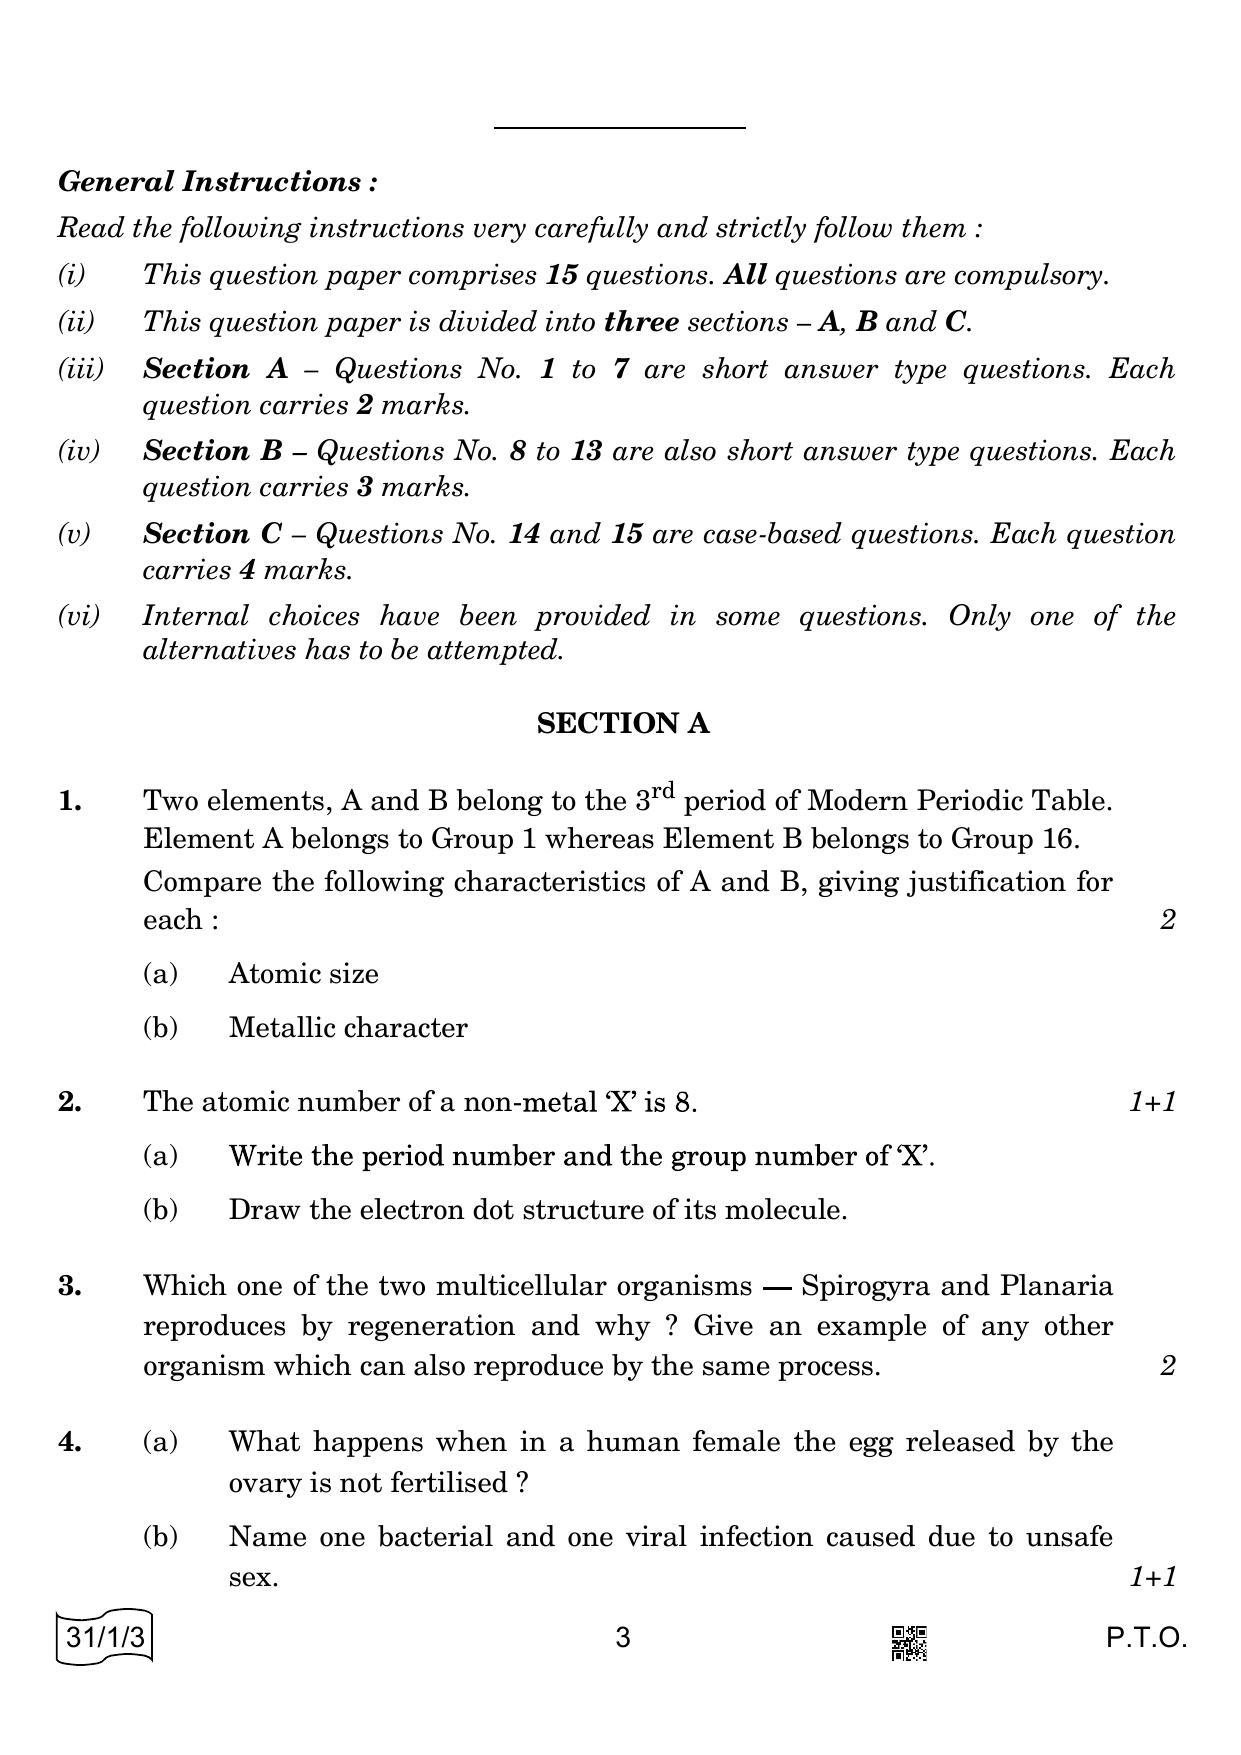 CBSE Class 10 31-1-3 Science 2022 Question Paper - Page 3